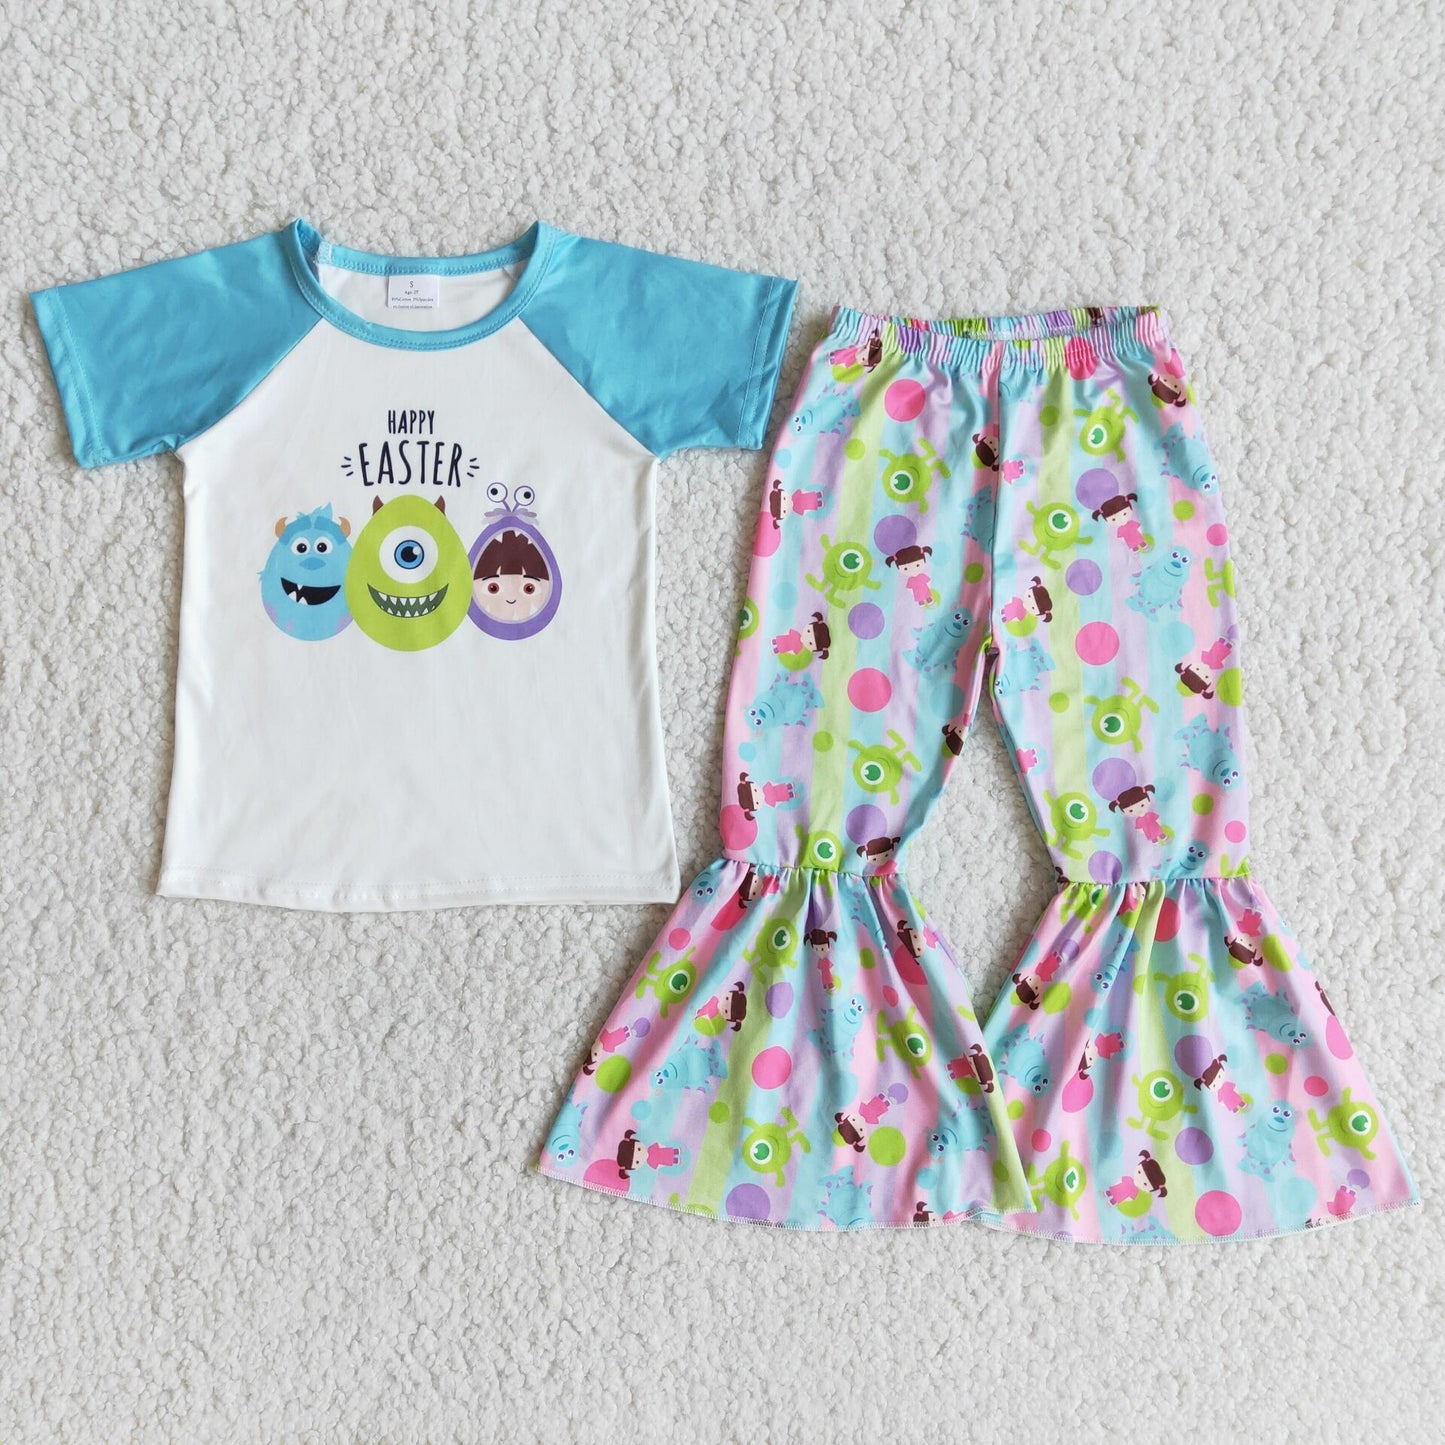 Happy Easter egg print outfit